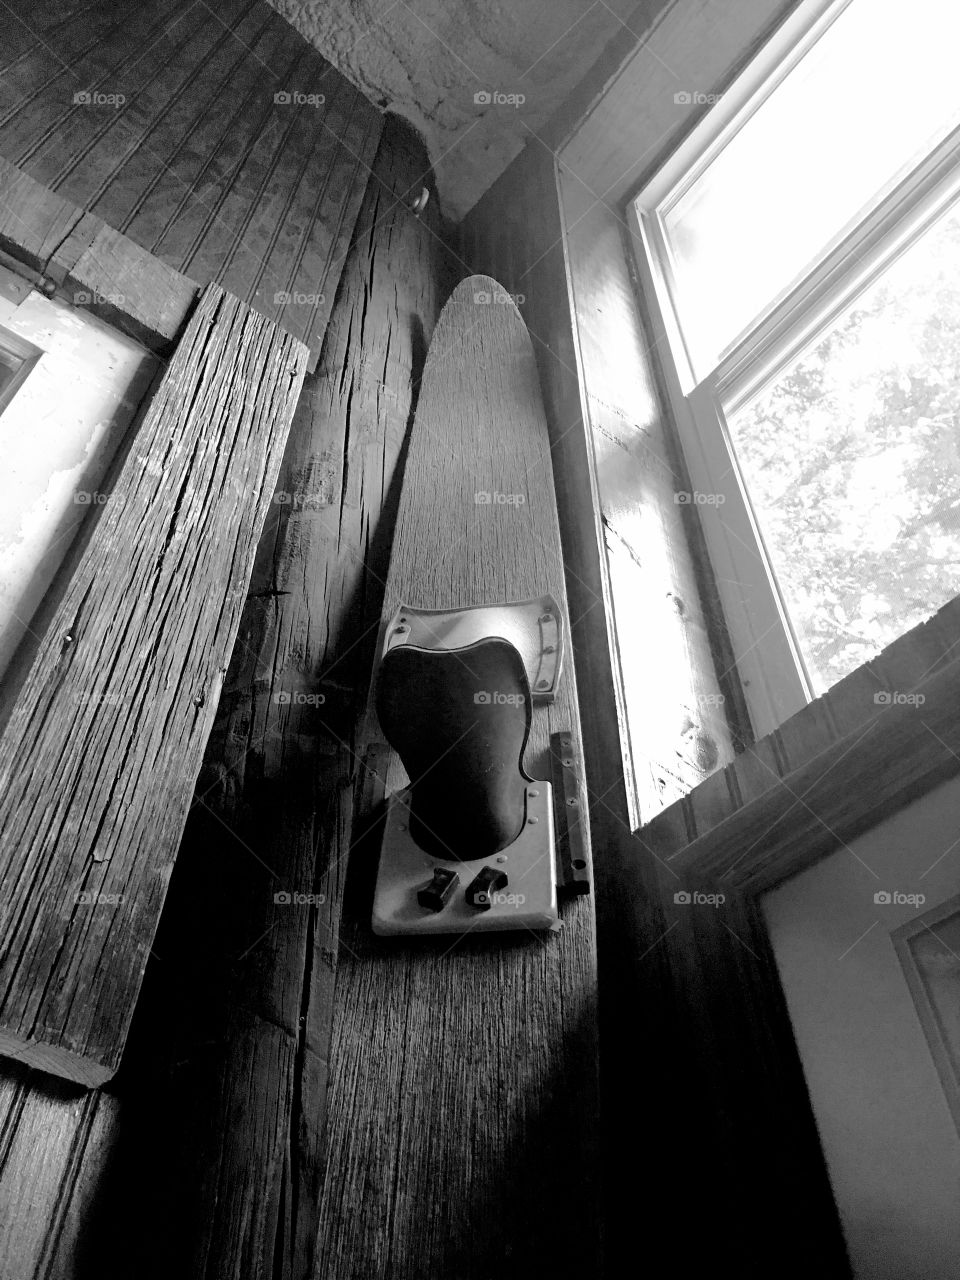 Wood, No Person, Indoors, Window, Architecture